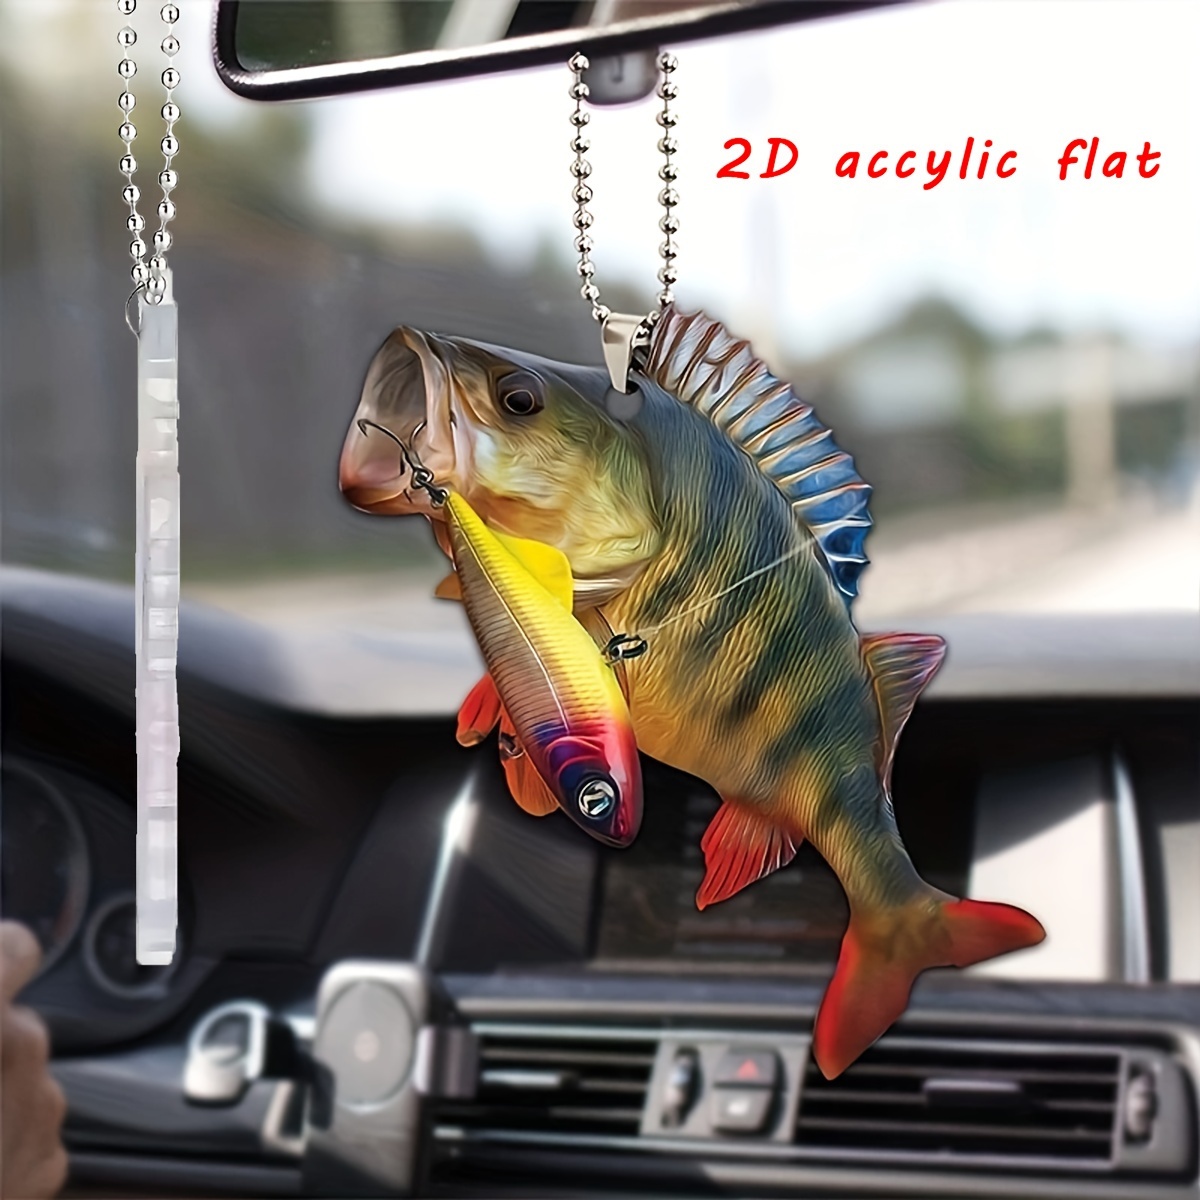 Creative And Interesting Fisherman Fish Acrylic Car Hanging Backpack  Accessories Christmas Home Decorations